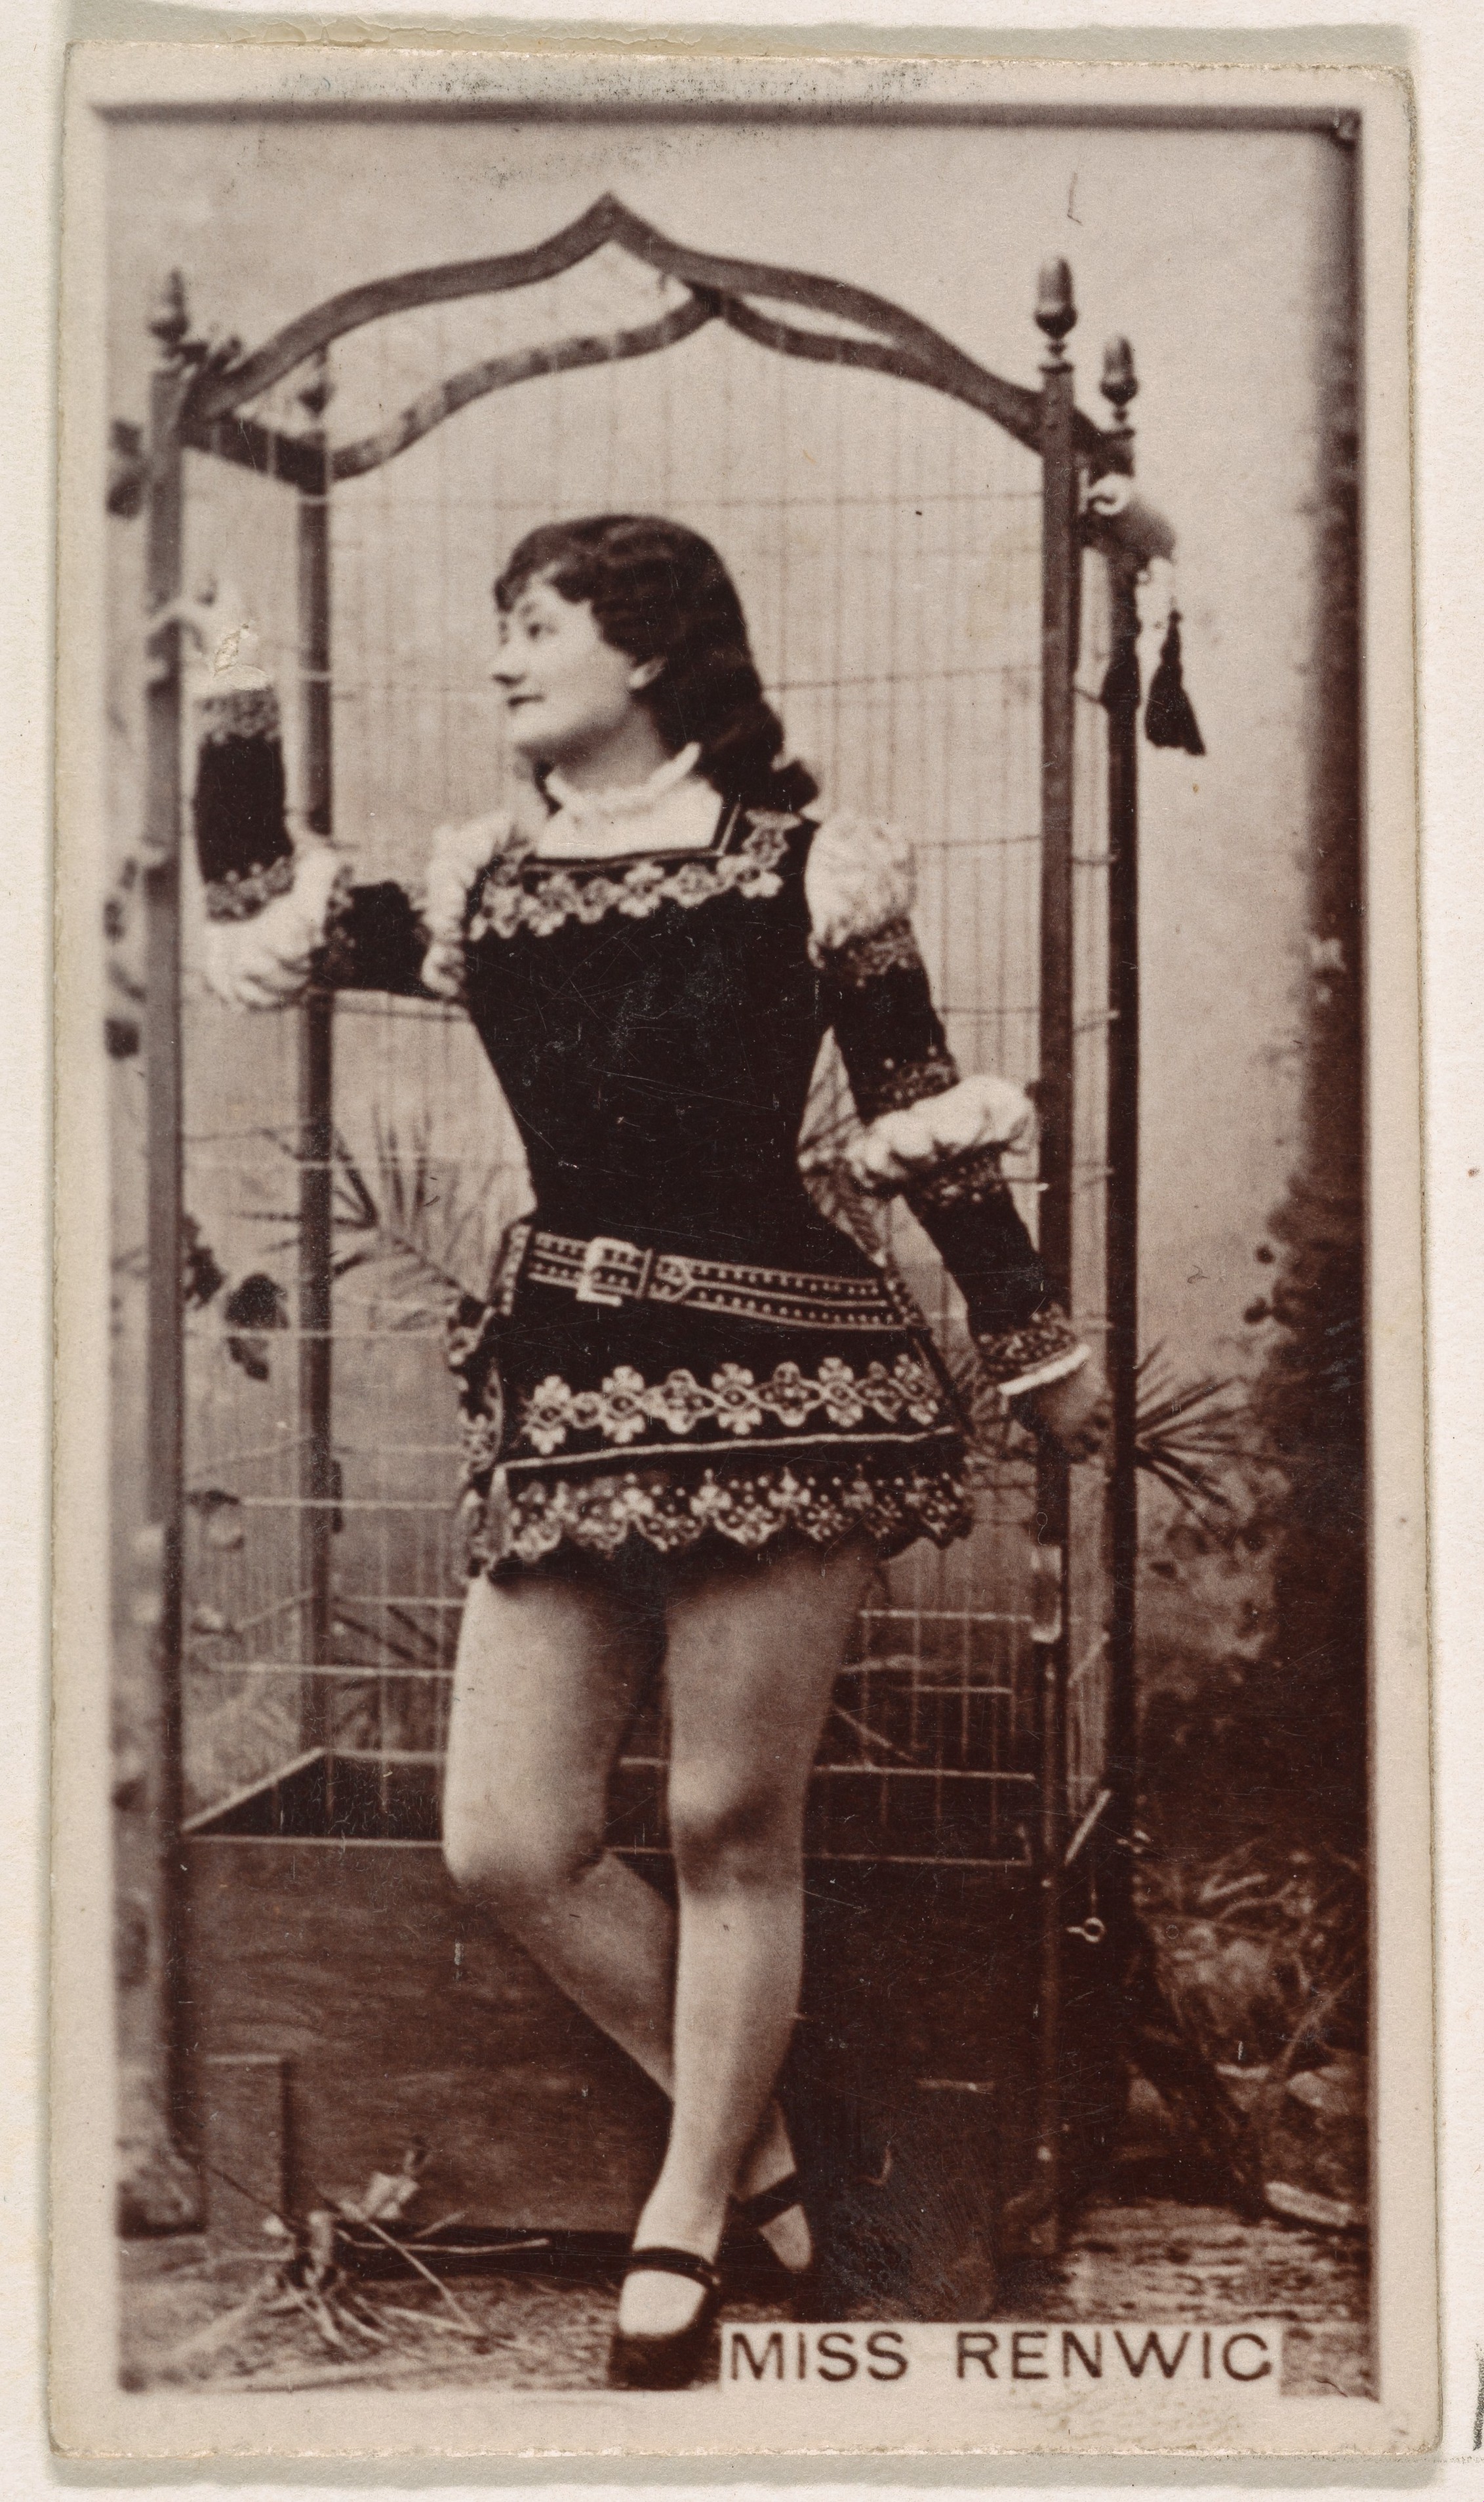 Issued By Kinney Brothers Tobacco Company Miss Renwick From The Actresses Series N245